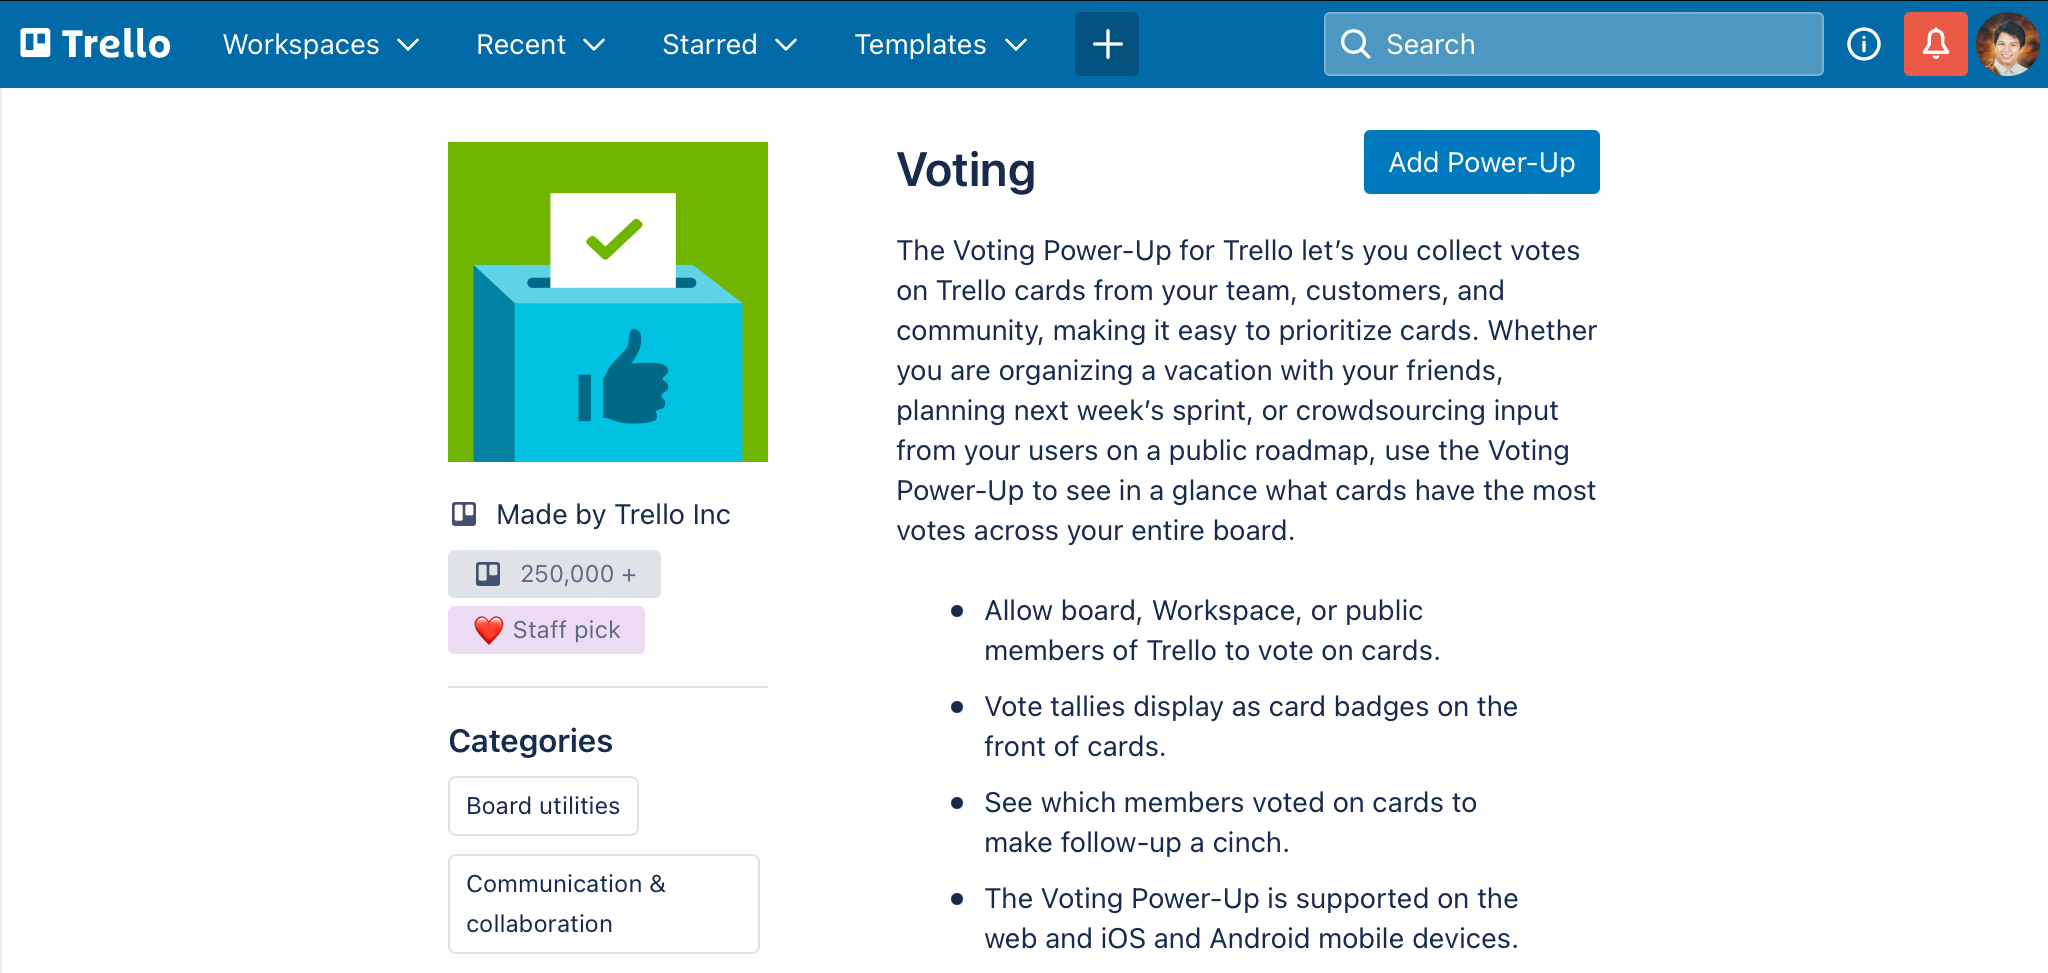 Voting Power Up page in Trello